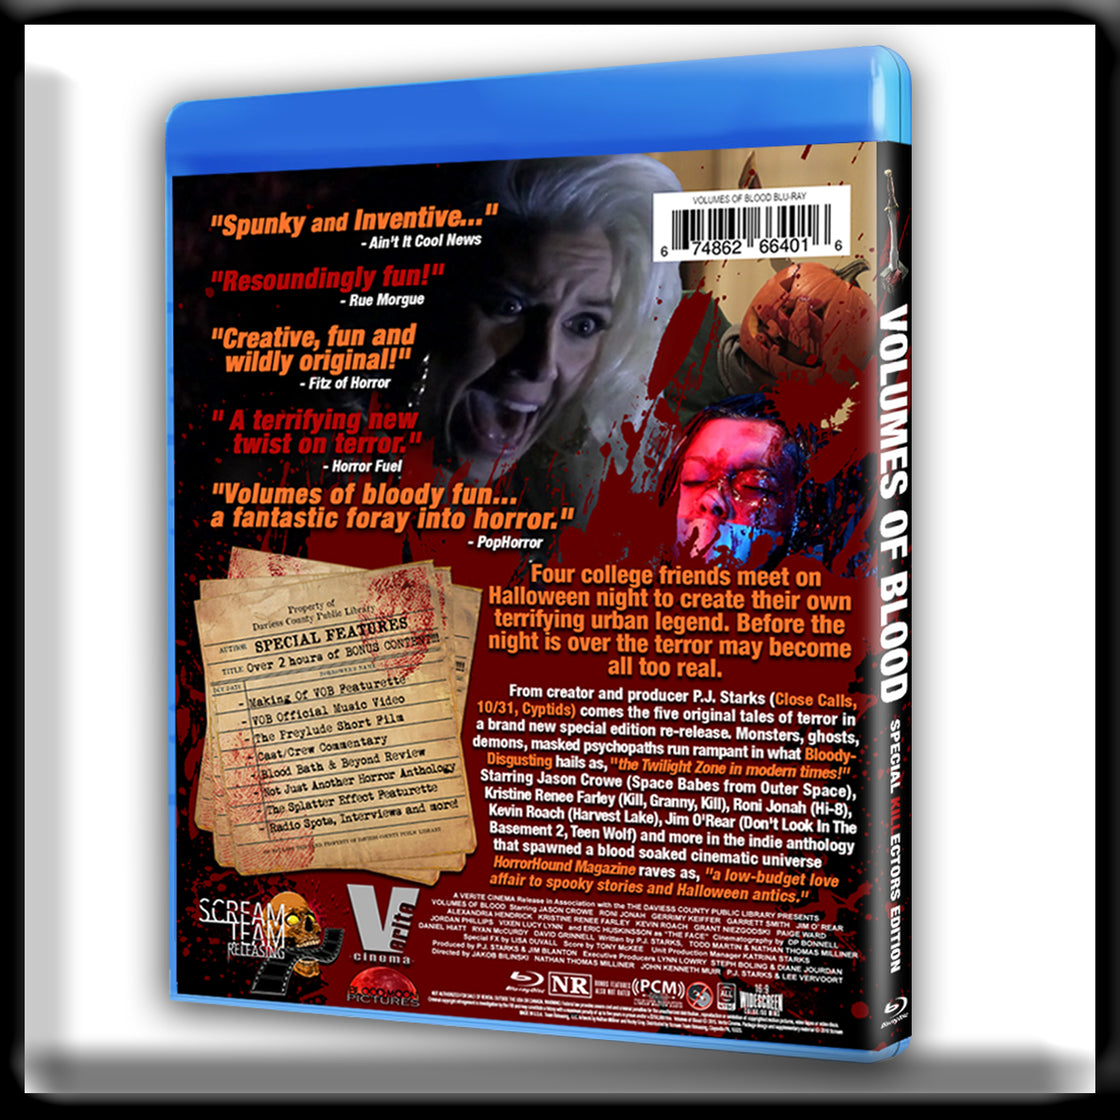 Volumes of Blood - Special Killectors Edition (Blu-ray)